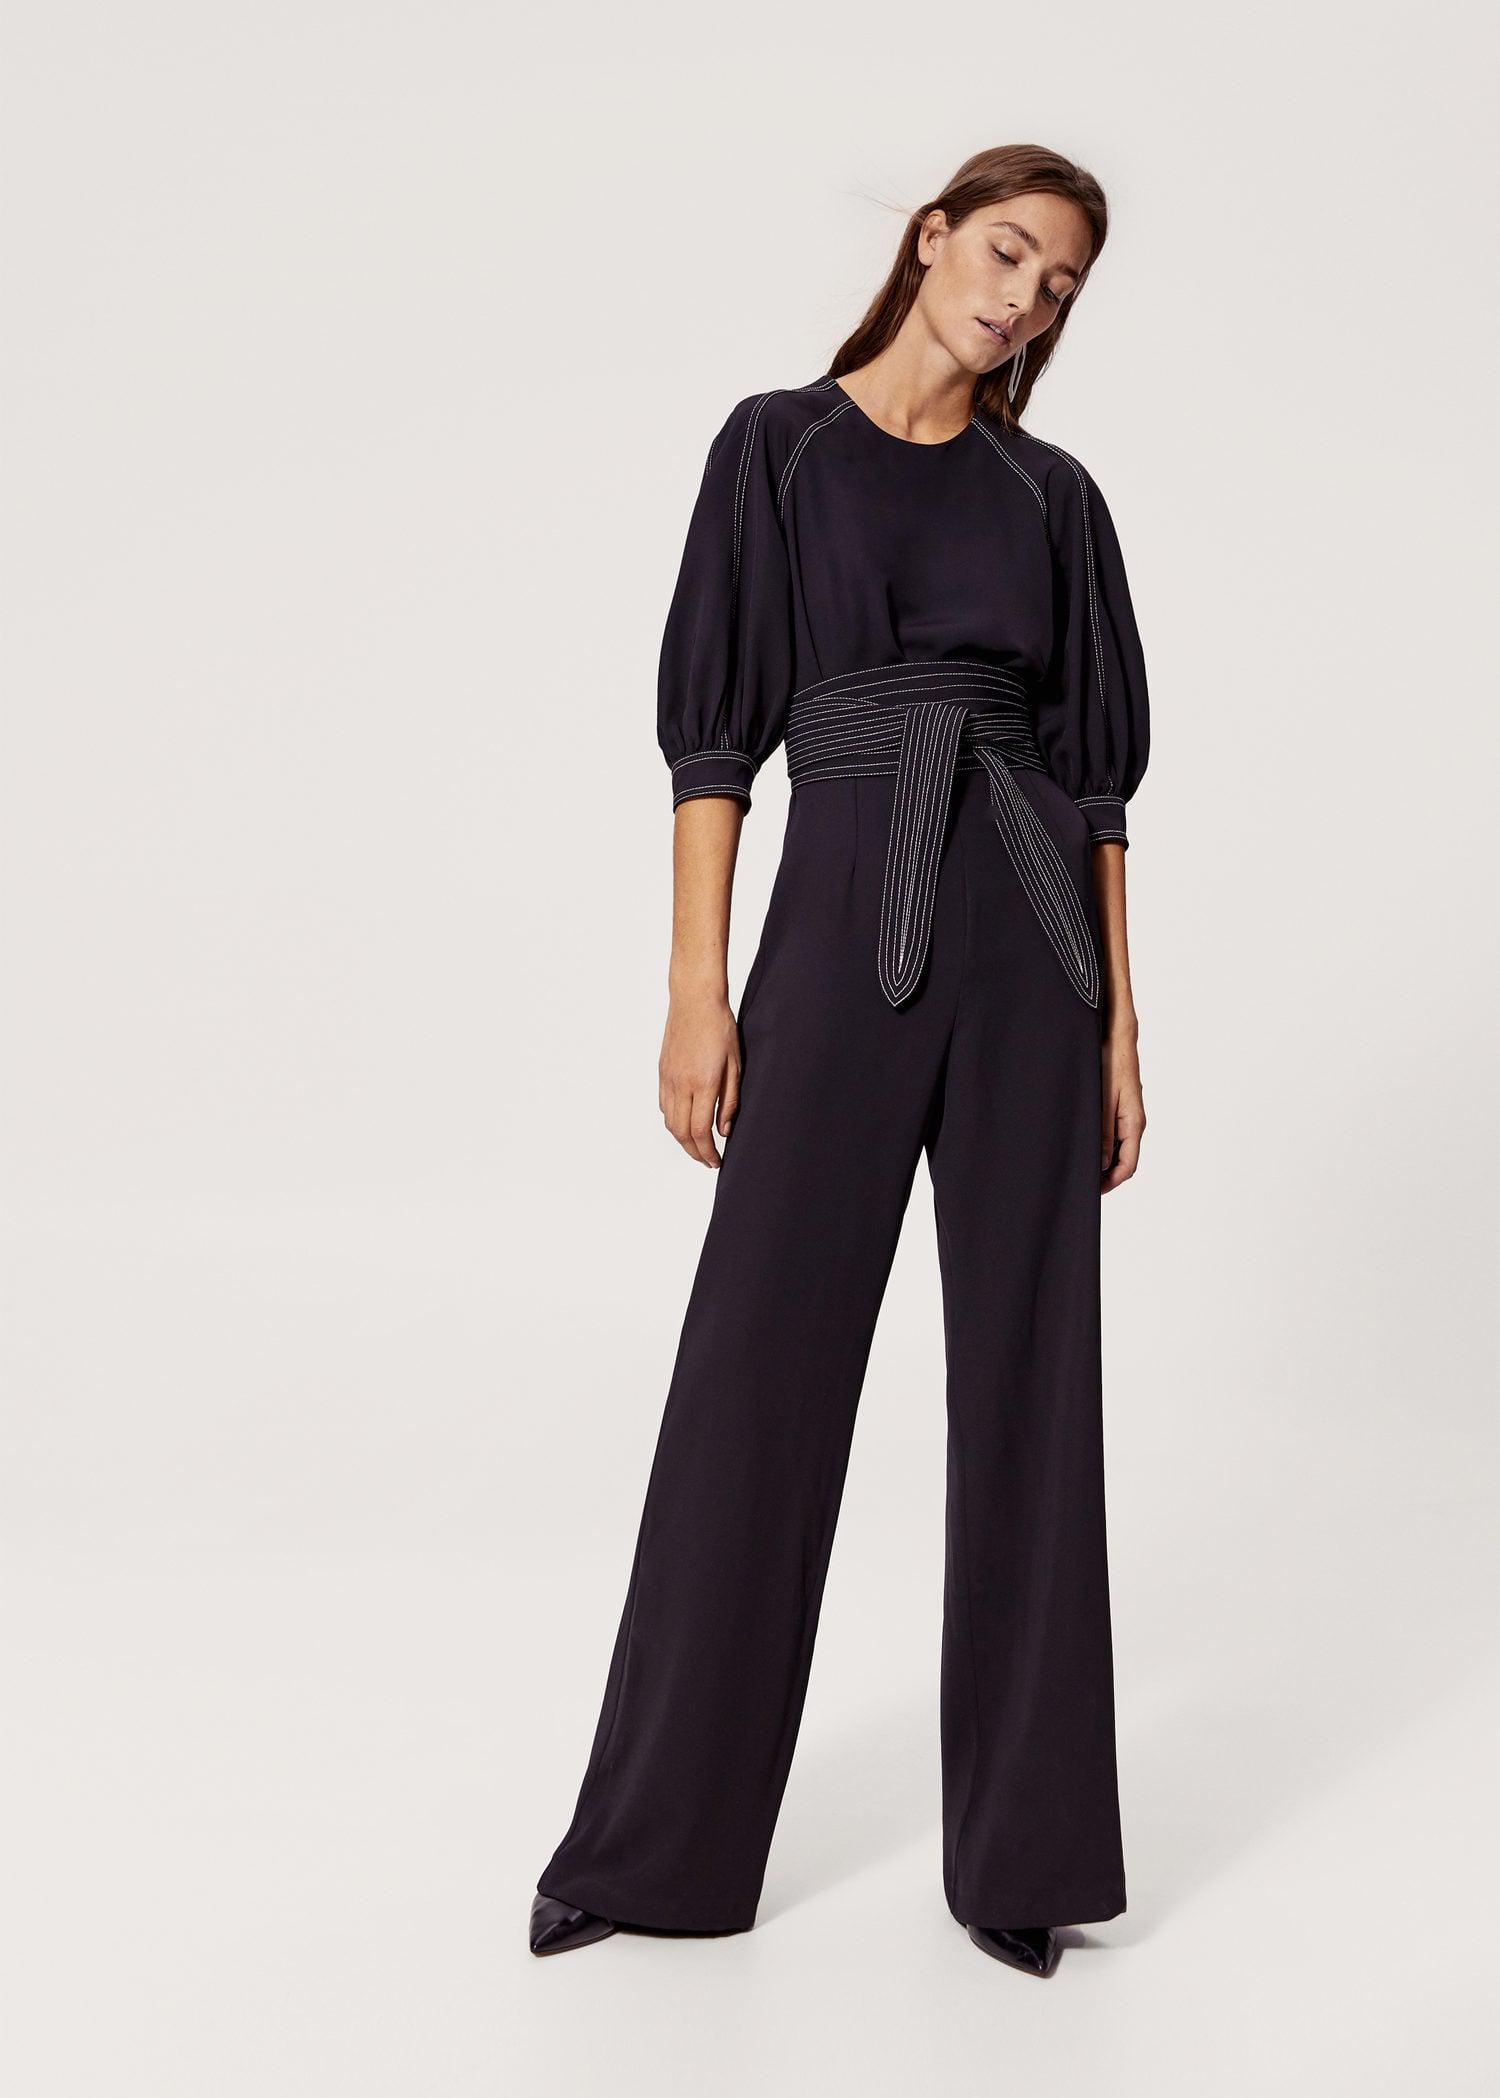 Mango Synthetic Contrast Seam Jumpsuit in Black - Lyst